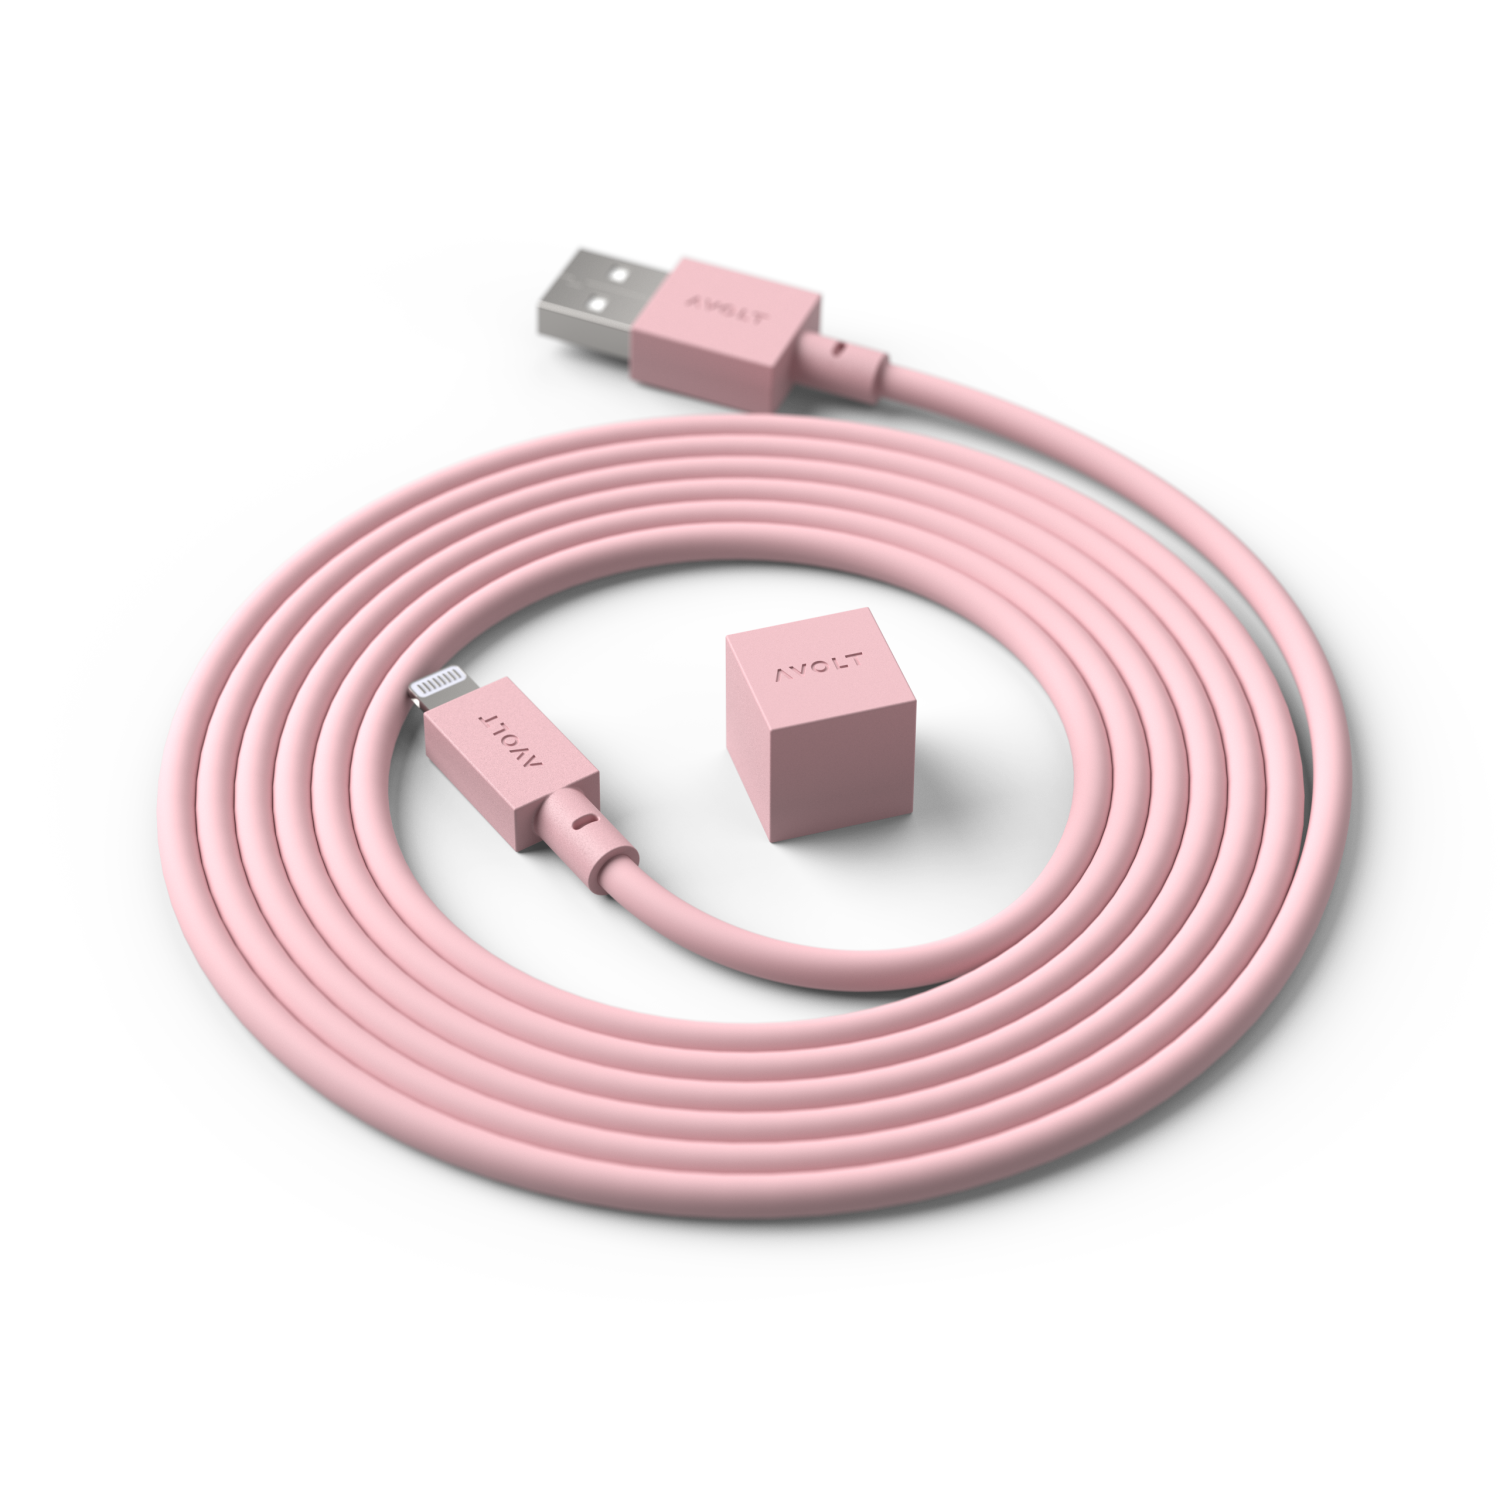 Cable 1 USB A to Lightning, 1.7m, Old Pink